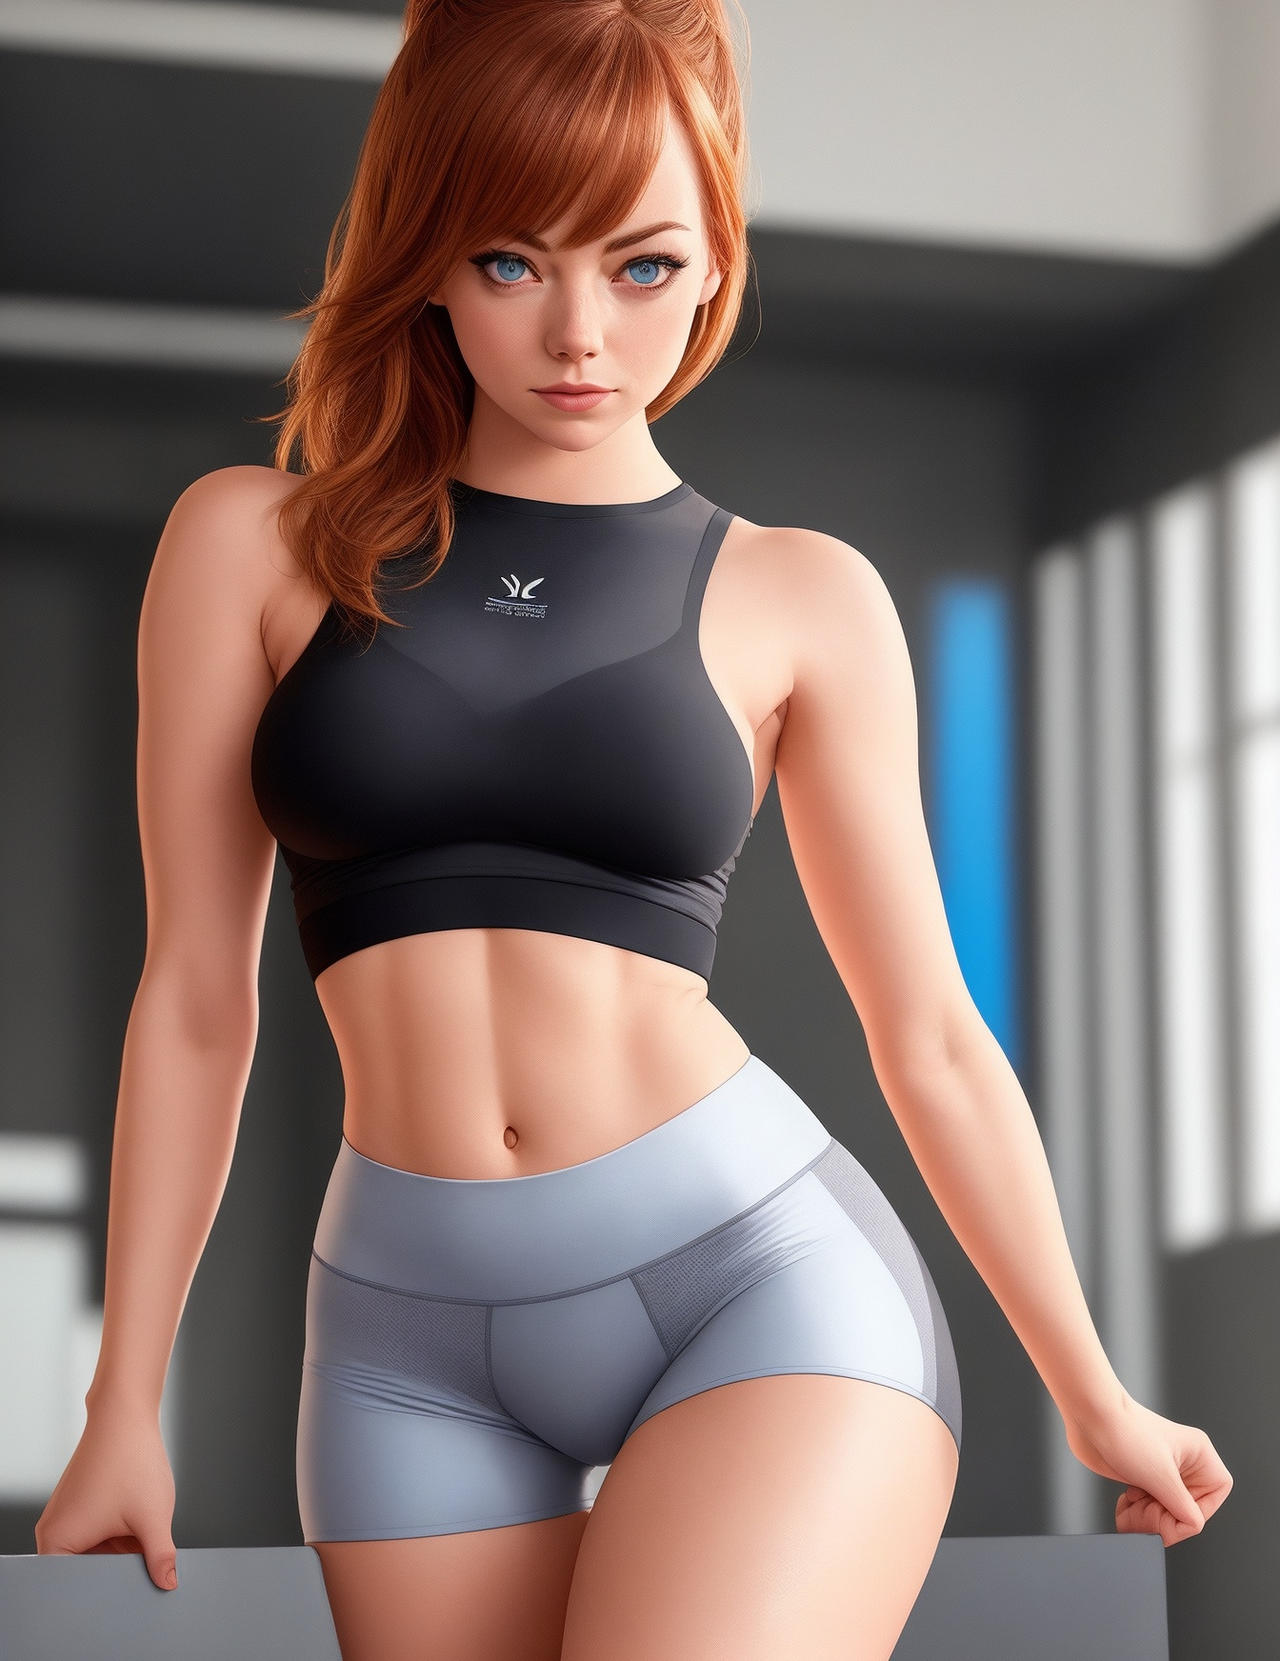 Default tight yoga shorts cameltoe Emma Stone actr by tollan86 on